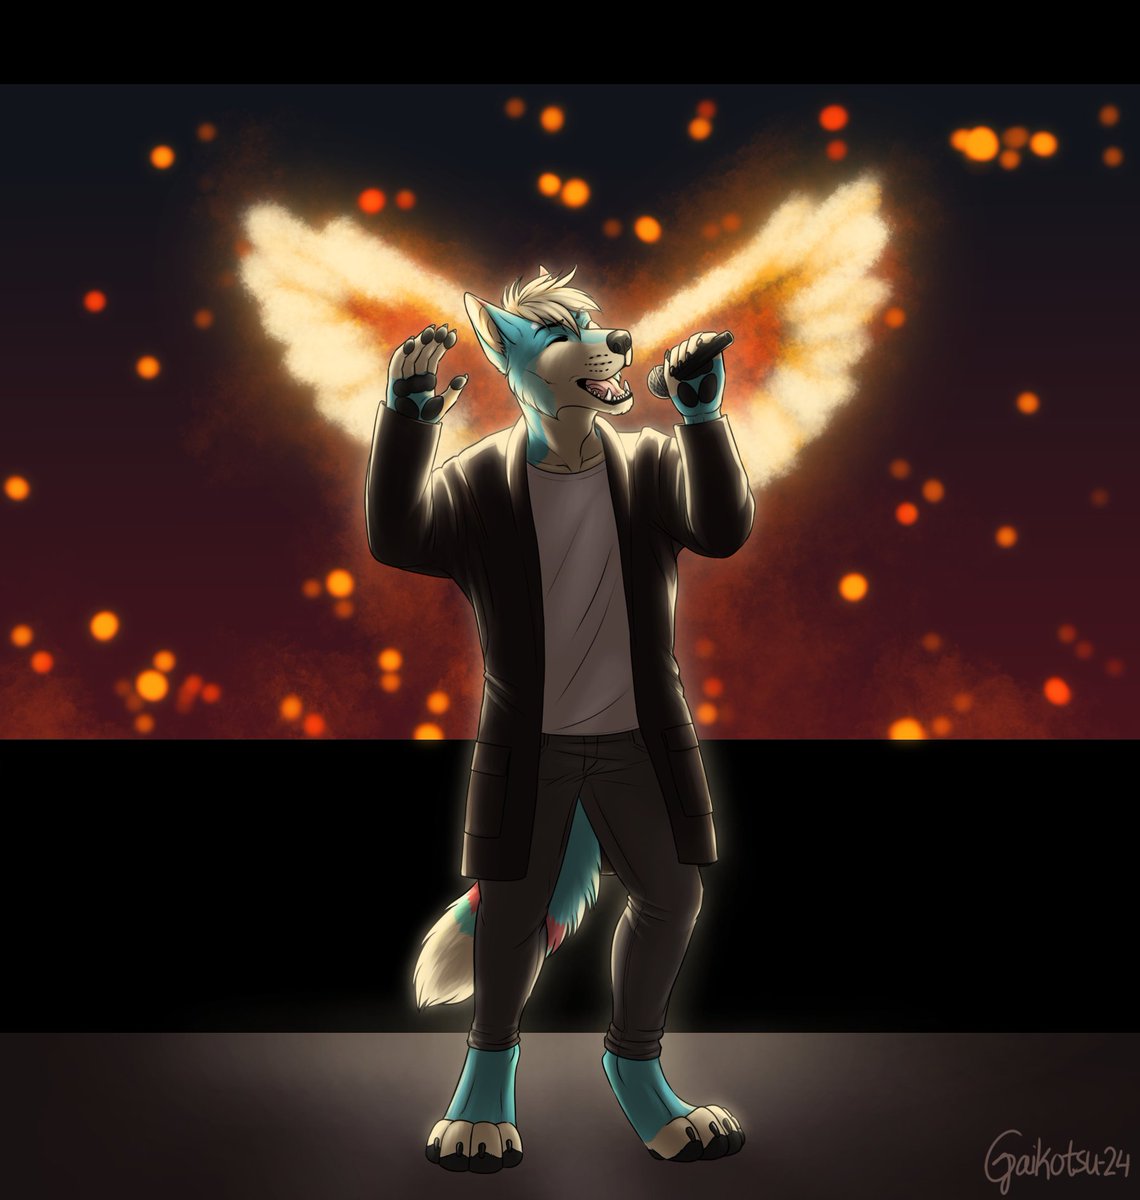 A gift commissioned for @NiphoYote featuring his spectacular performance at NordicFuzzCon Furovision song contest!